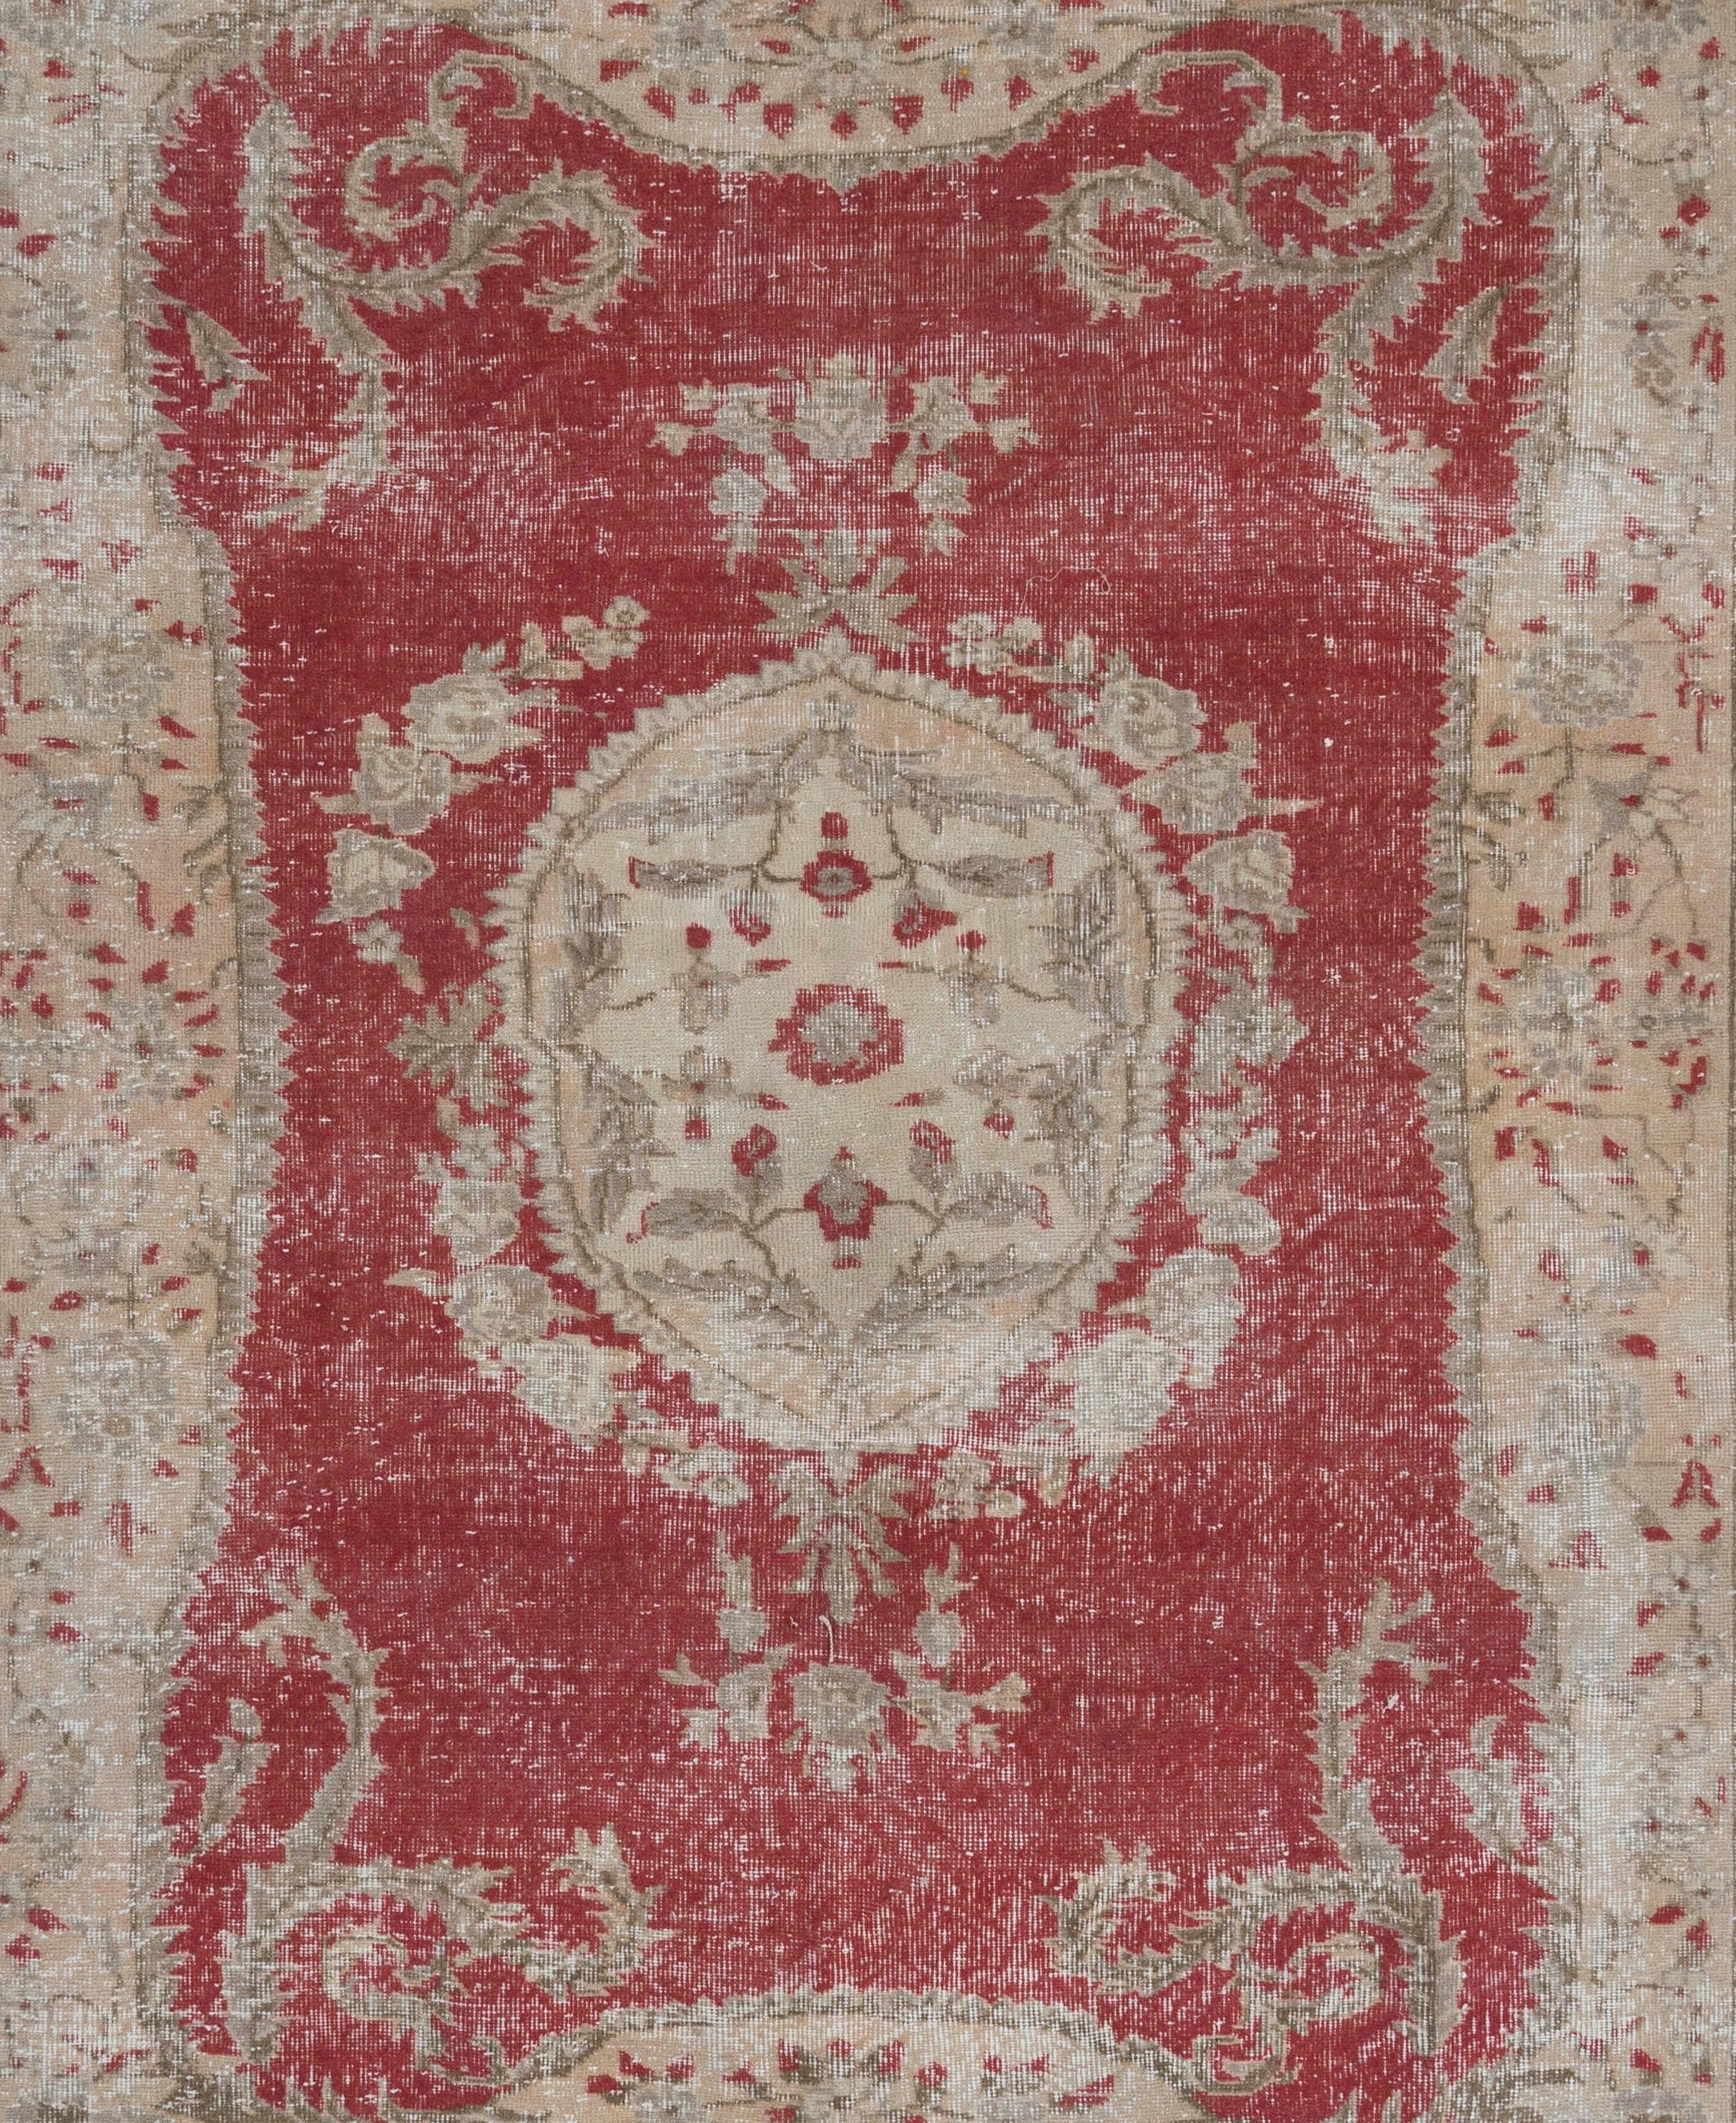 6.5x9.5 Ft Vintage Aubusson Inspired Turkish Rug in Red, Beige & Taupe Colors In Good Condition For Sale In Philadelphia, PA